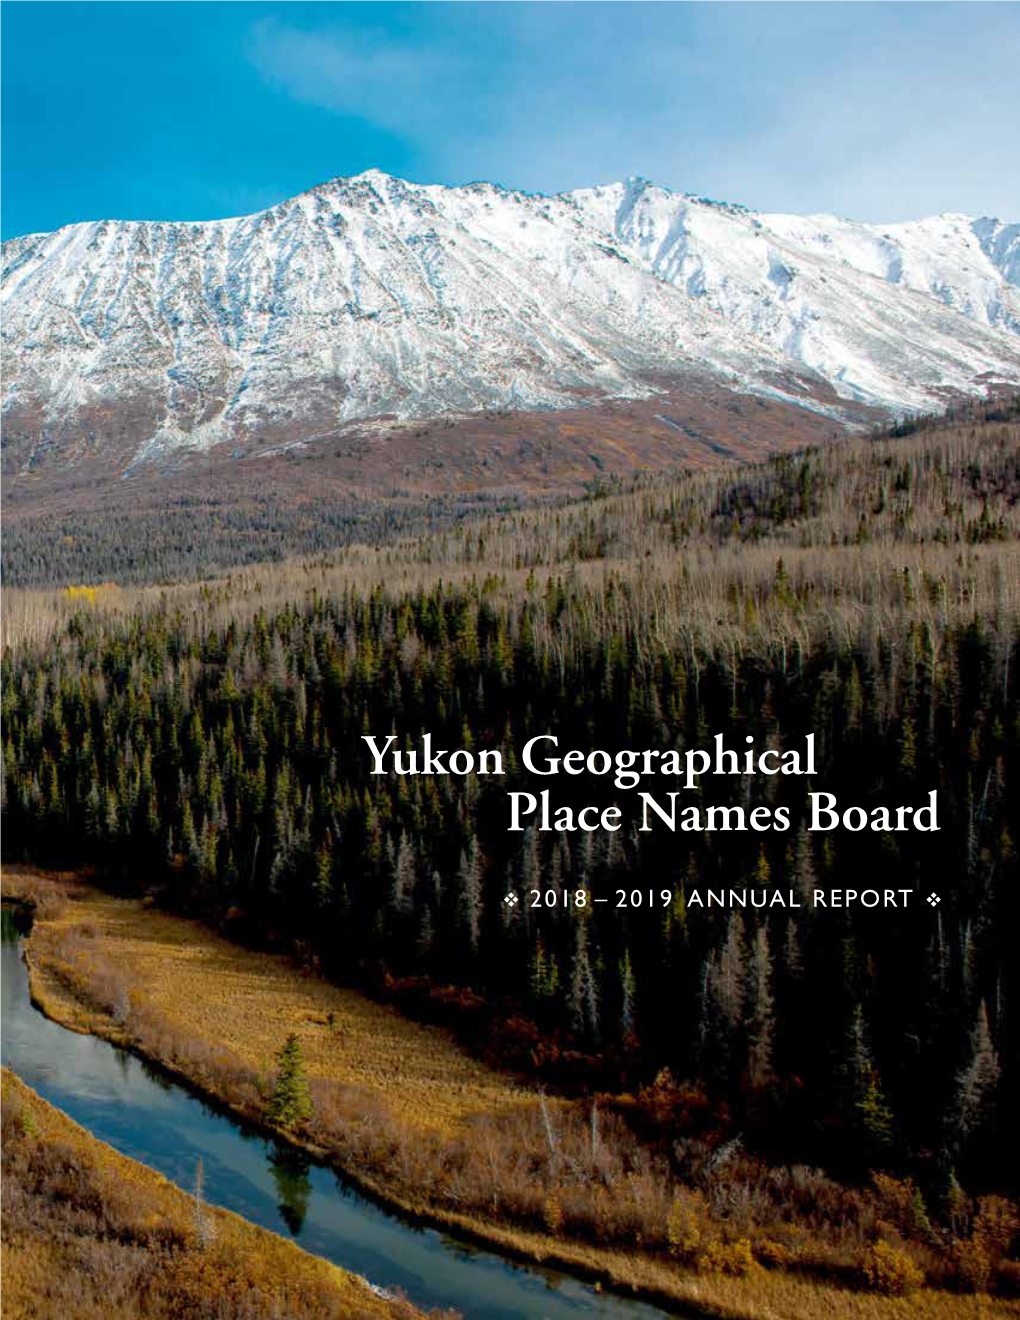 Yukon Geographical Place Names Board 2018-2019 Annual Report